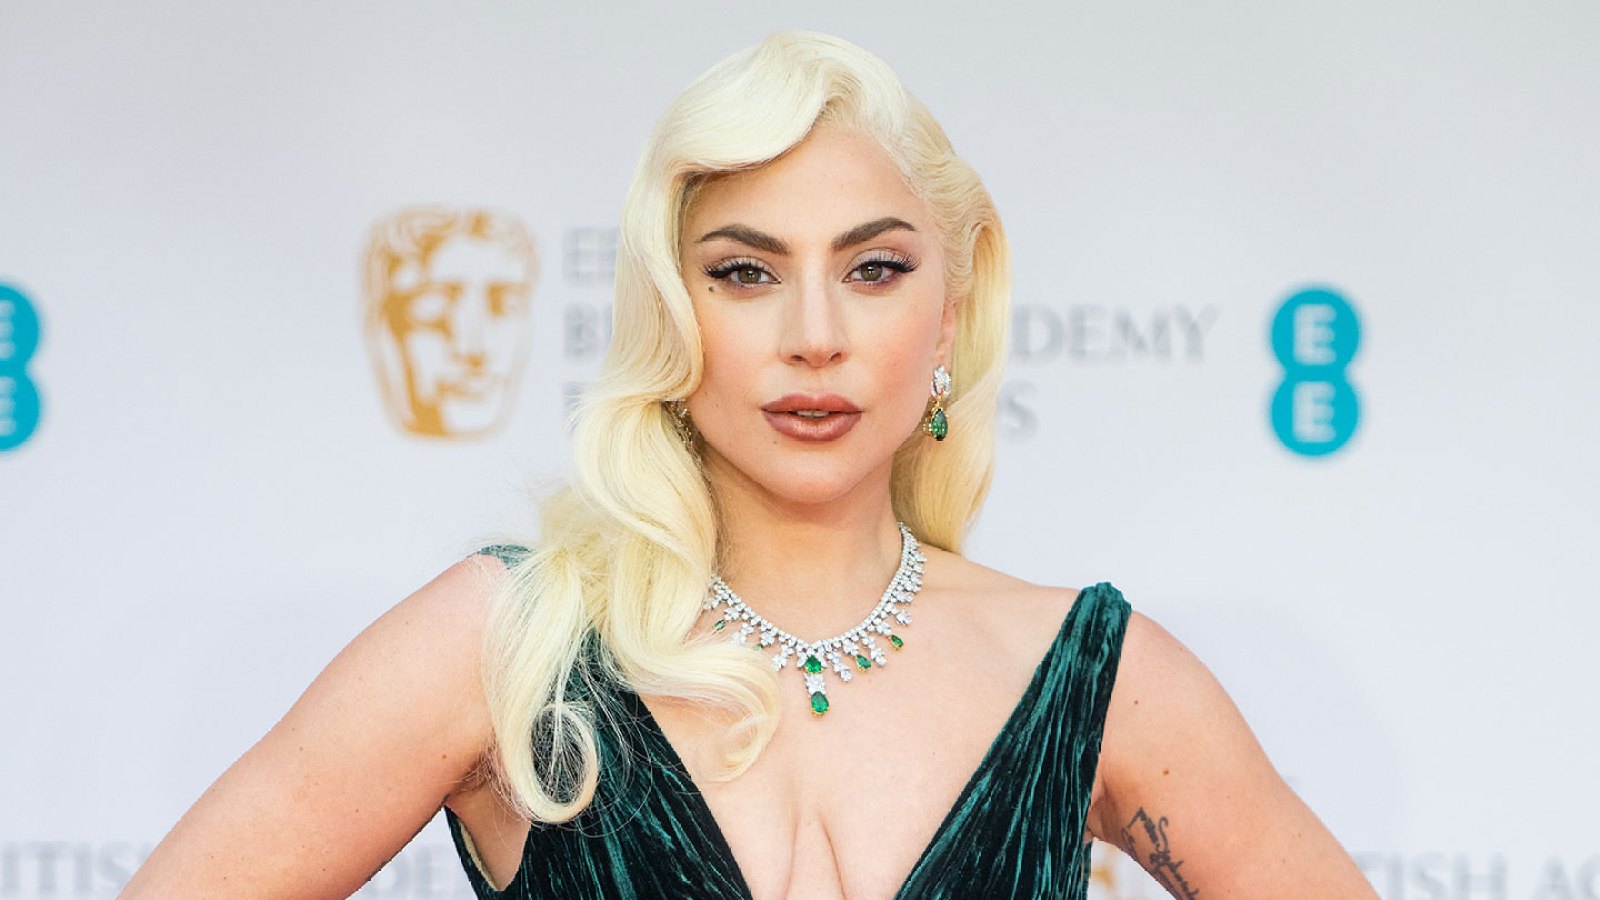 Lady Gaga Says Her Beauty Routine 'Has Been a Healing Practice for Me